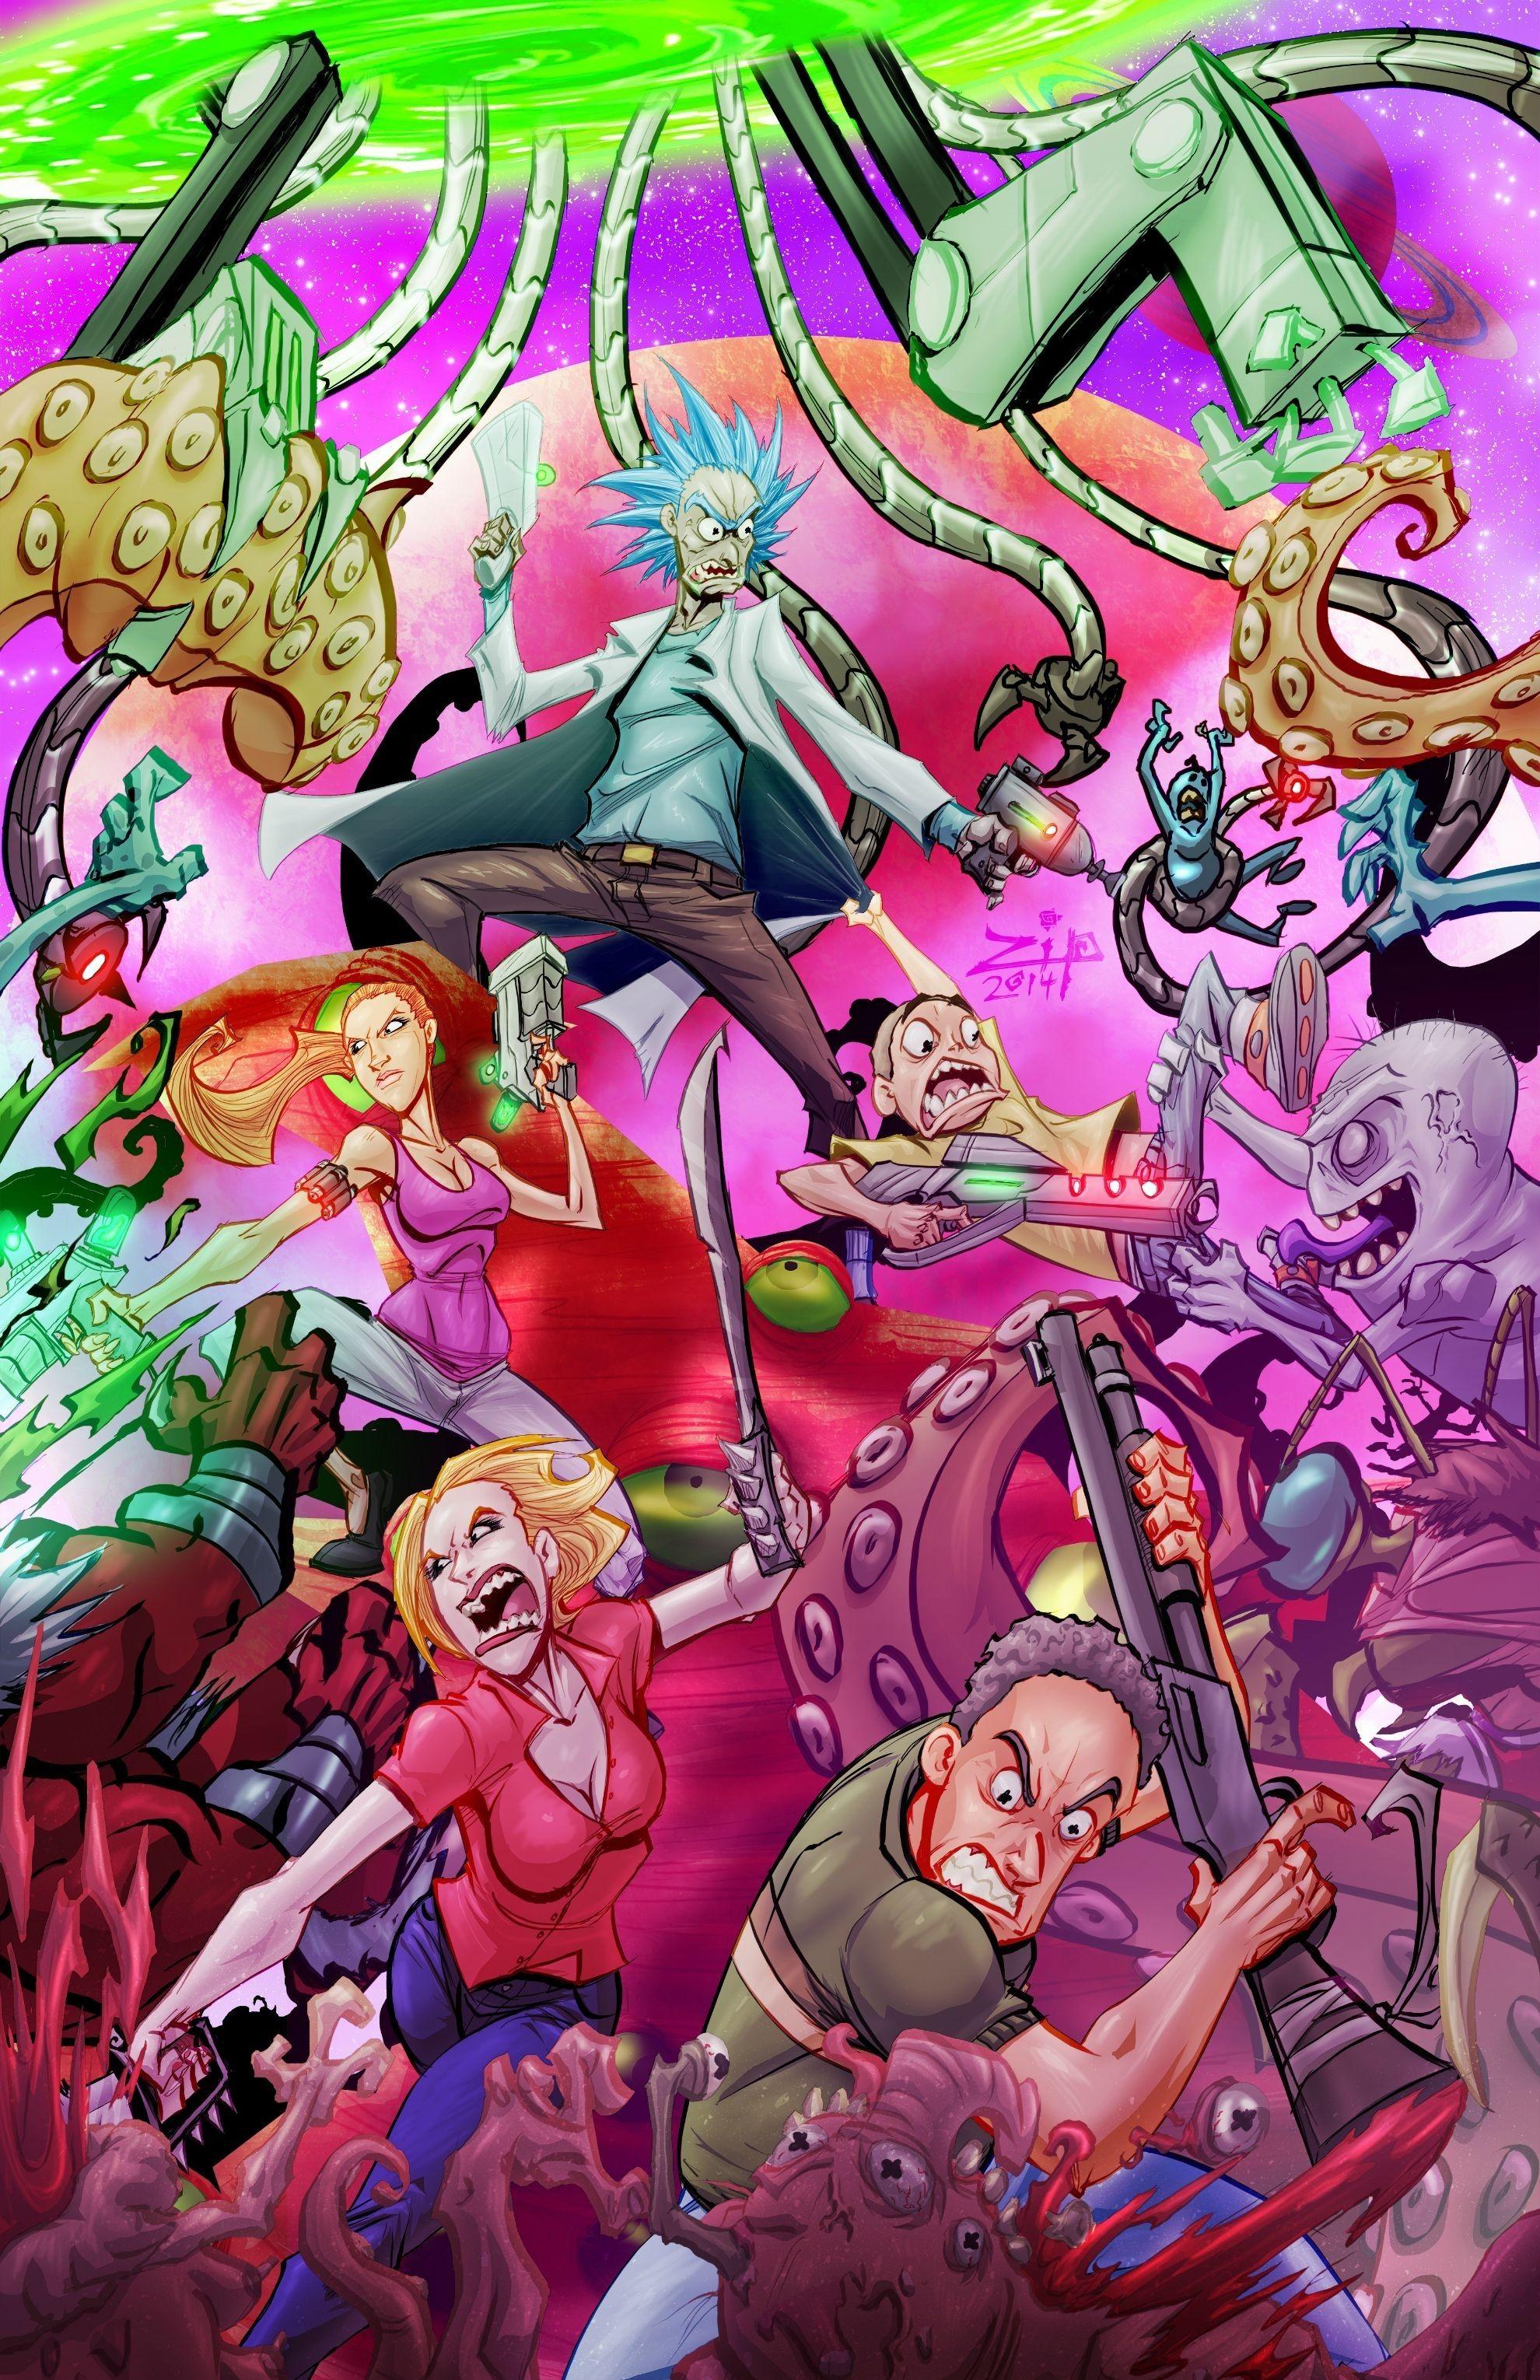 Rick And Morty Psychedelic Wallpapers Top Free Rick And Morty